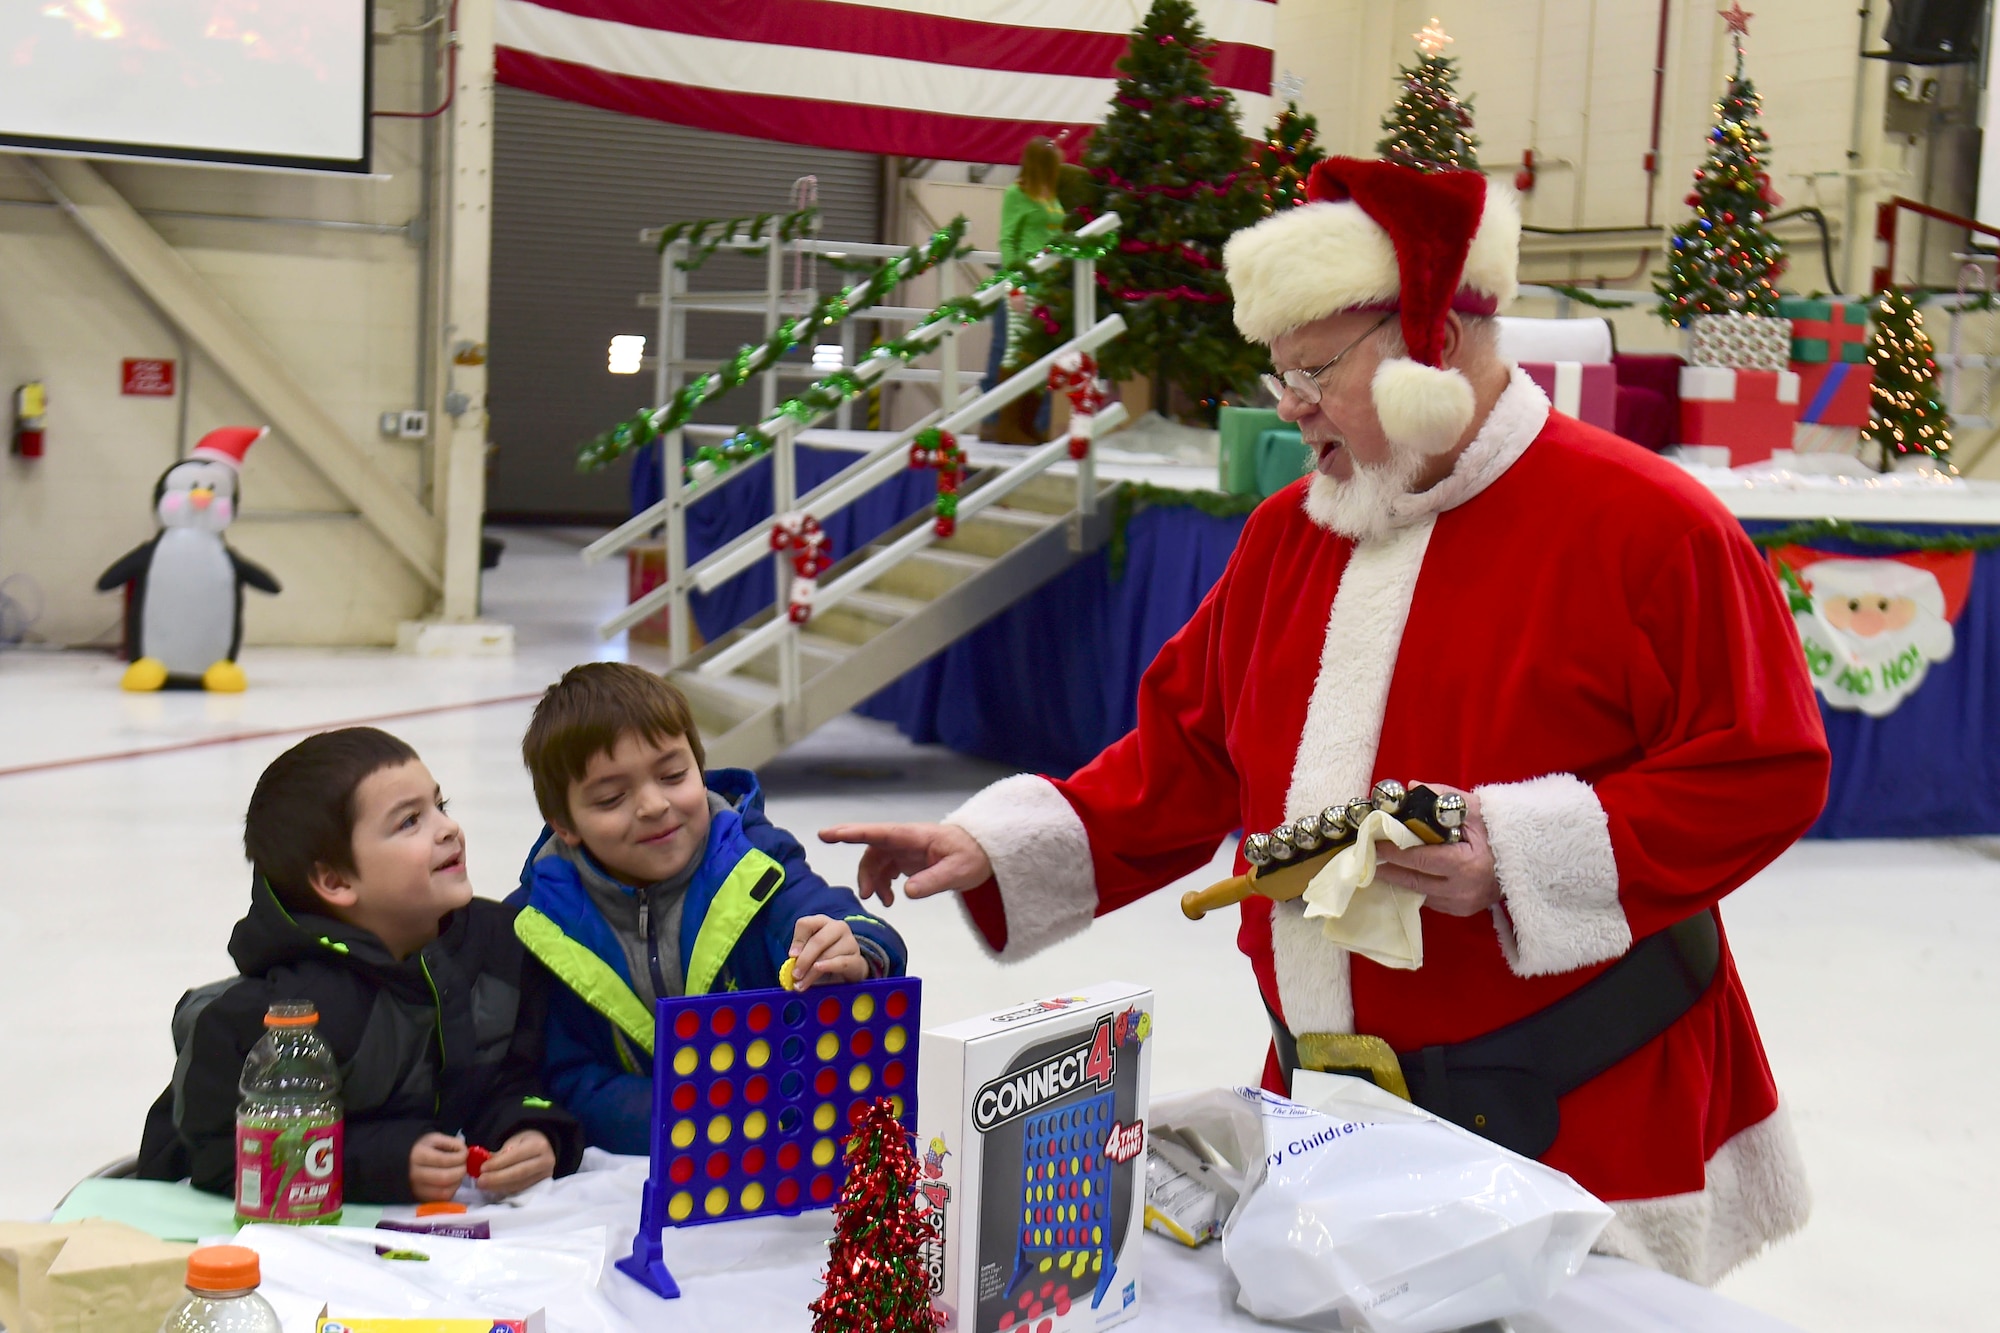 Santa greets Connor and Isidoro Mata while they play a game during the Kids’ Christmas Party at Grissom Air Reserve Base, Indiana, Dec. 7, 2019.  The 434th Force Support Squadron Airman and Family Readiness Center transformed Dock 1 into a Christmas wonderland complete with cookie decorating, toys and hot cocoa.  (U.S. Air Force Photo by Staff Sgt. Chris Massey)